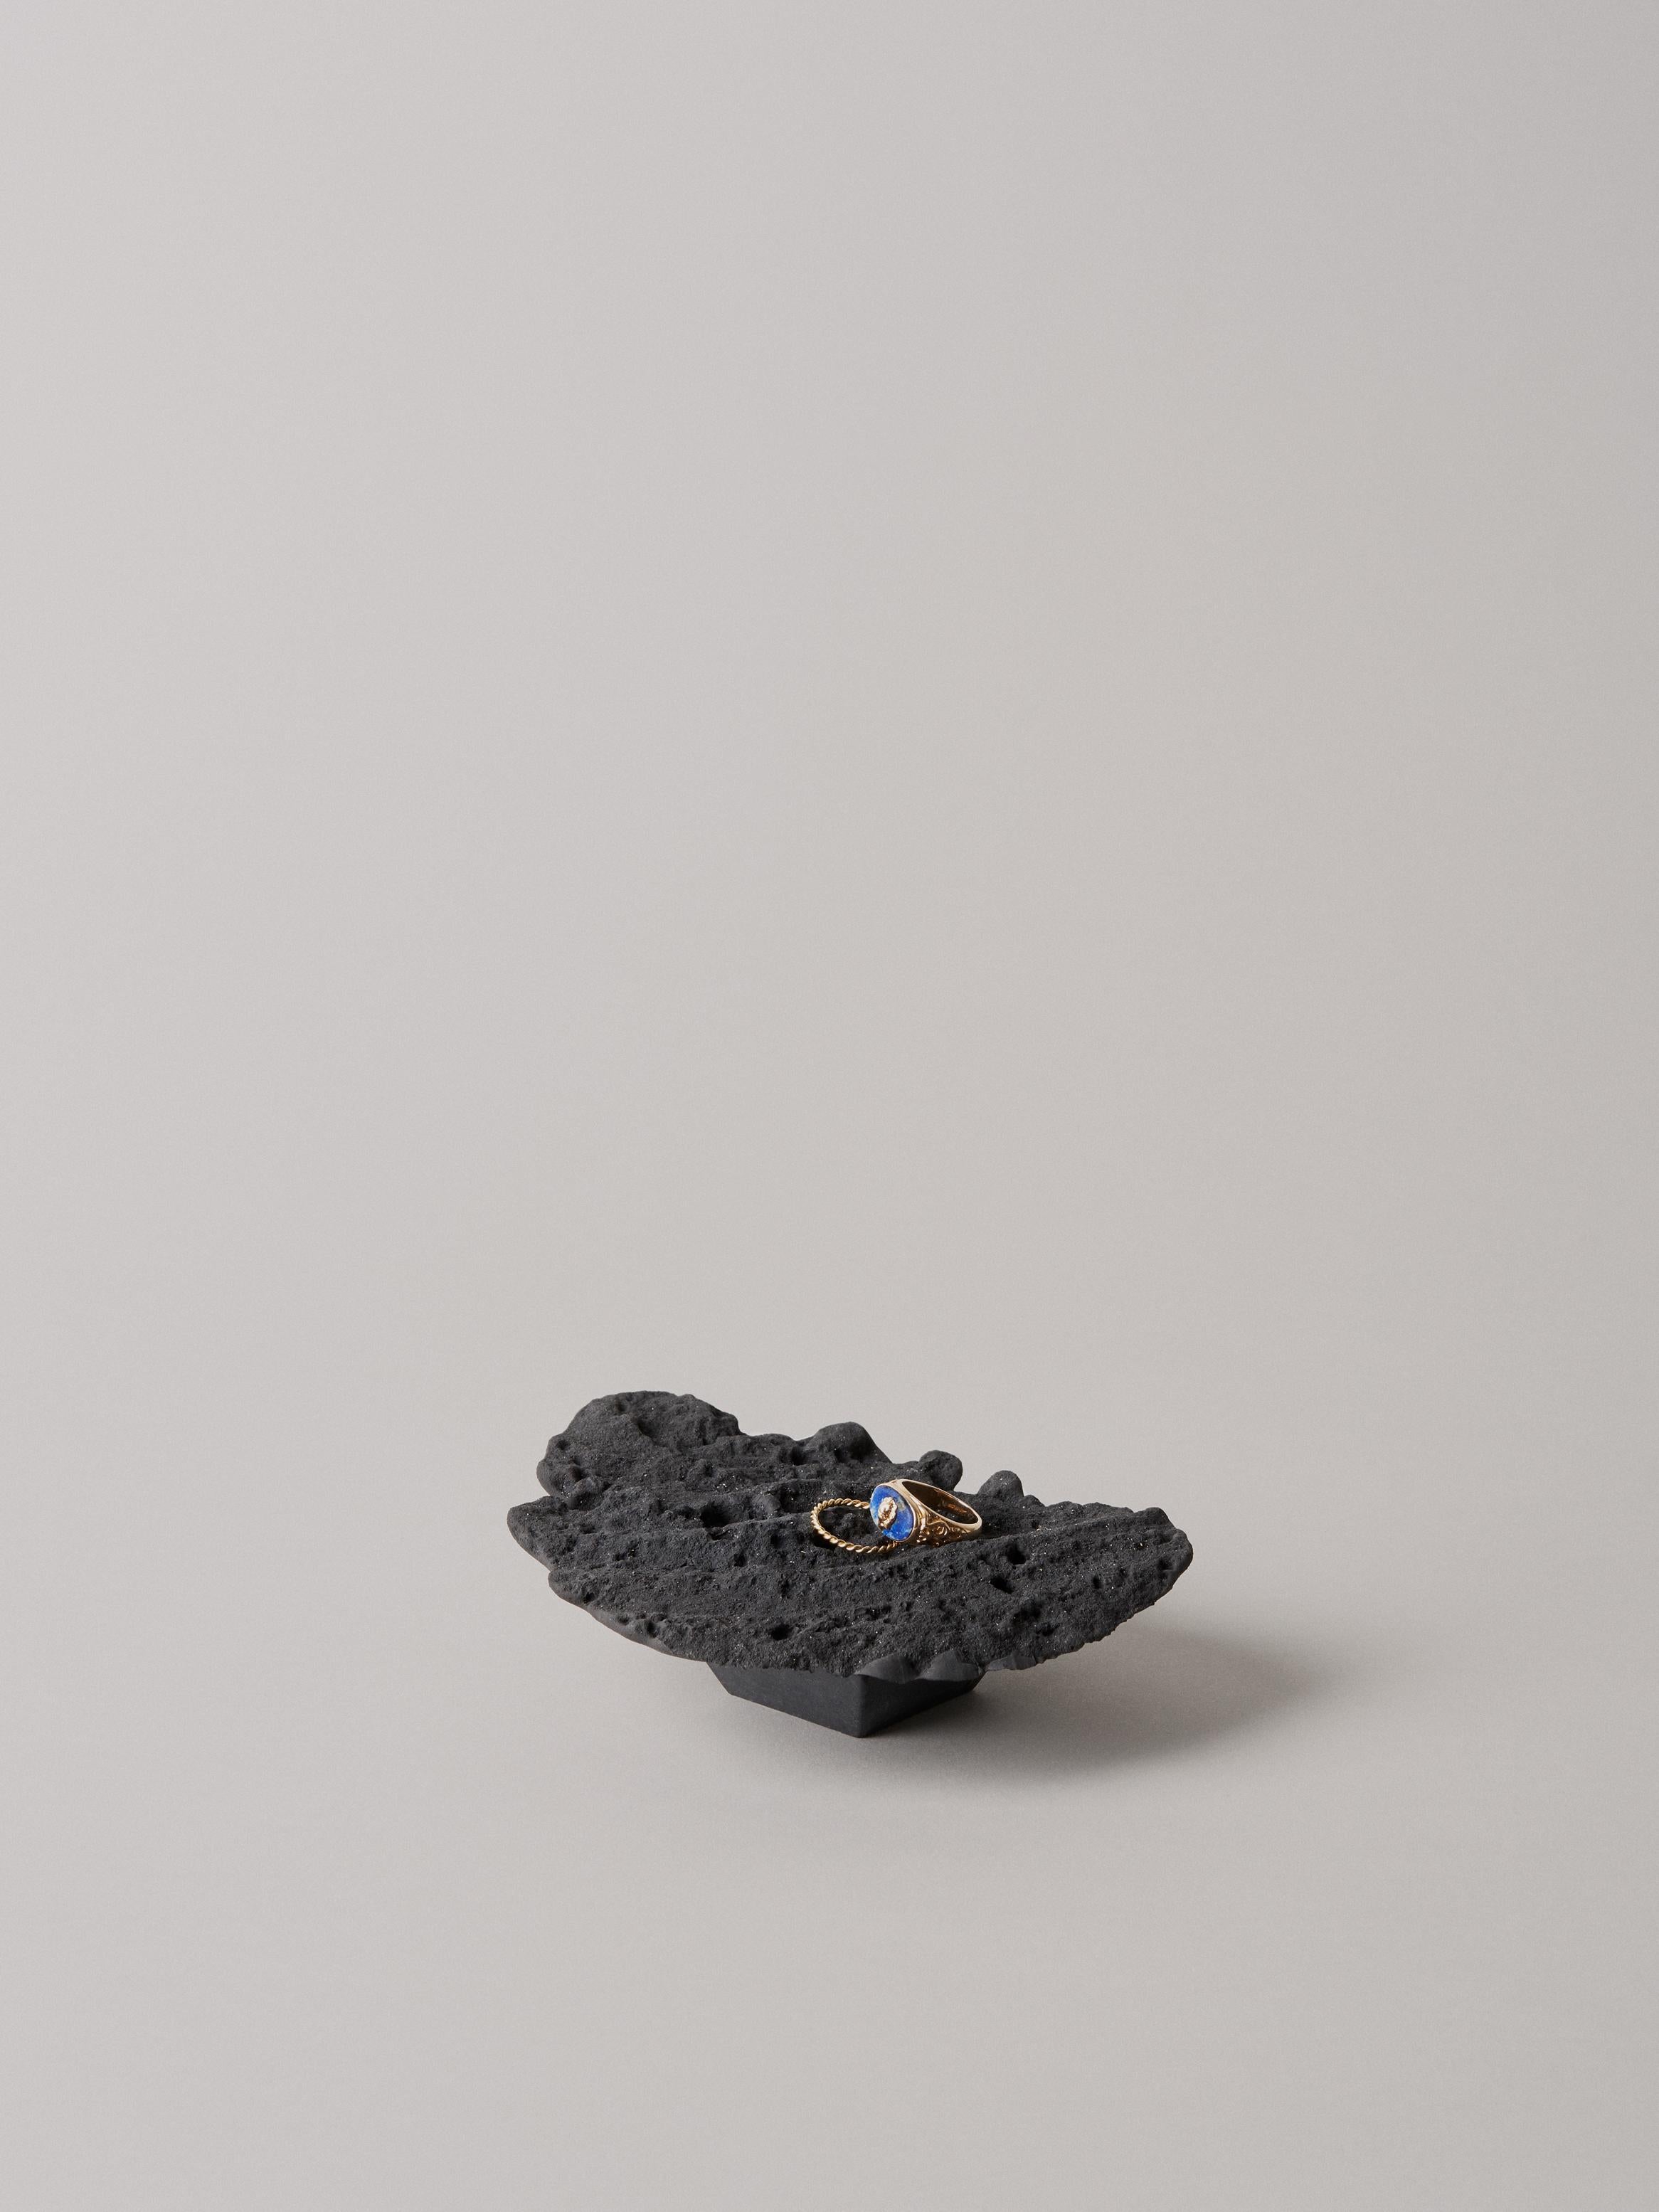 Lava bed serving plate by Kajsa Melchior.
Fictive Erosion collection
Dimensions: H: Approx. 4 cm
 Ø: Approx. 40 cm
Materials: Sculpted in sand by pressaure from air and water
 Developed in acrystal, colored by coal.

This piece is also